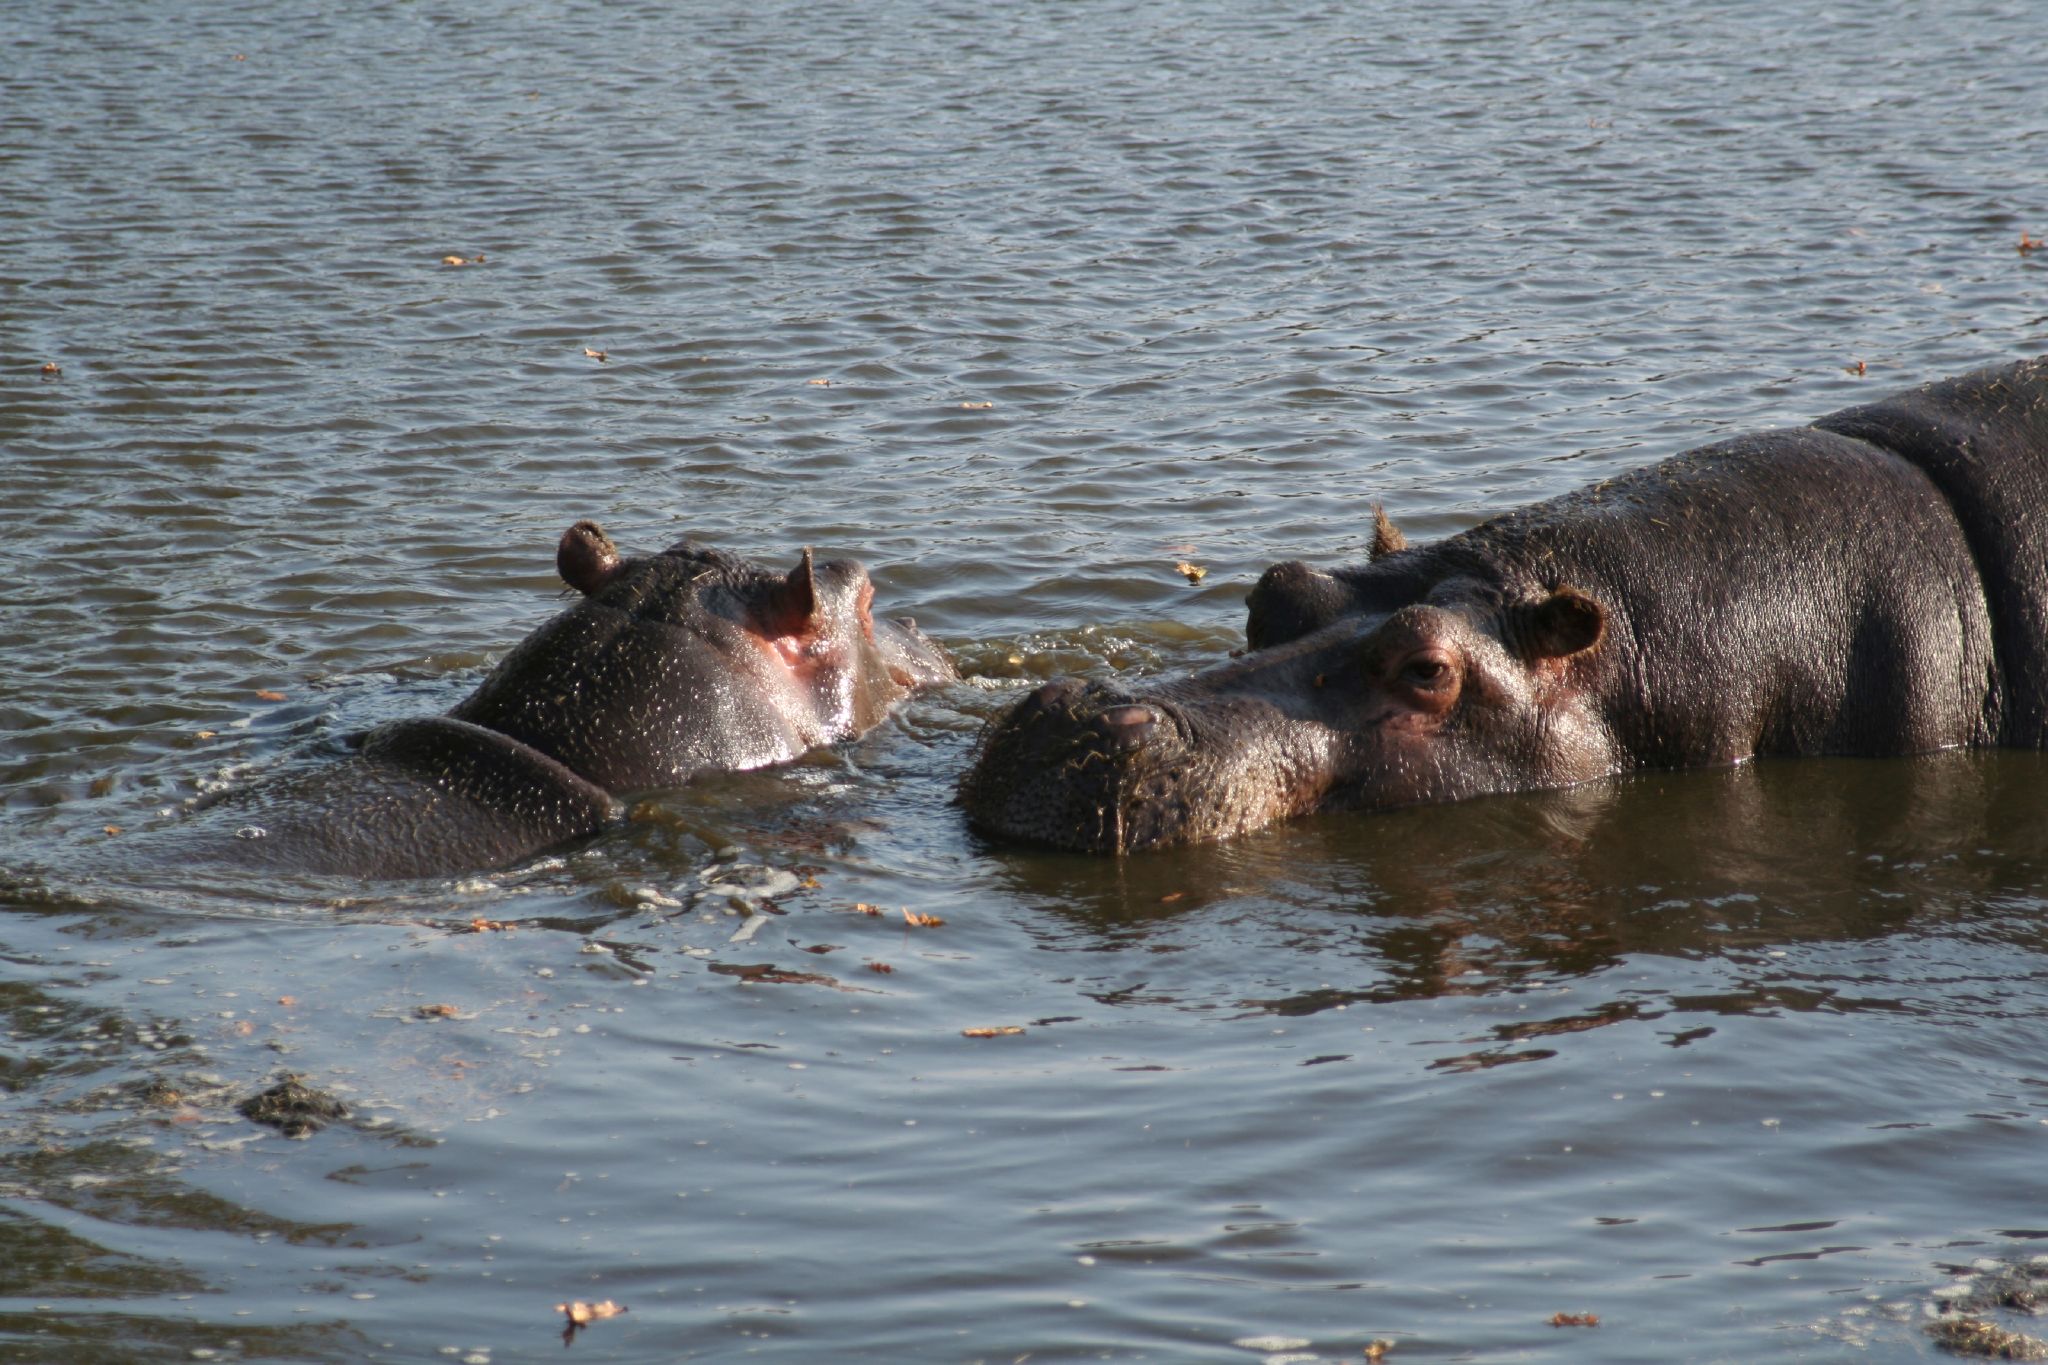 two hippos swimming in the water on a sunny day